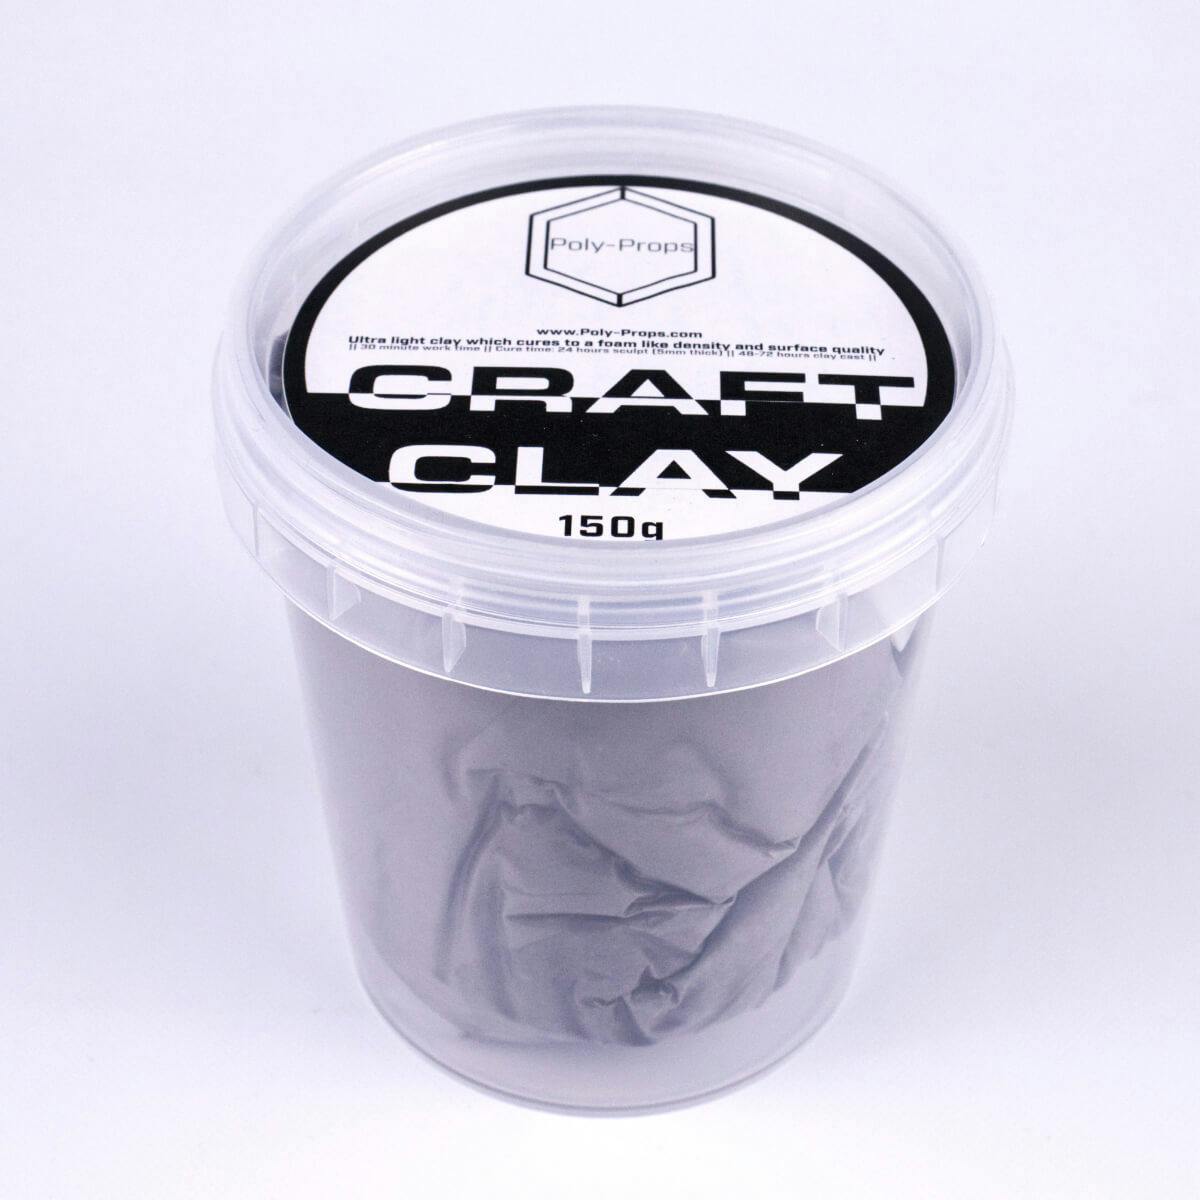 Small pack of 150g grey foam clay